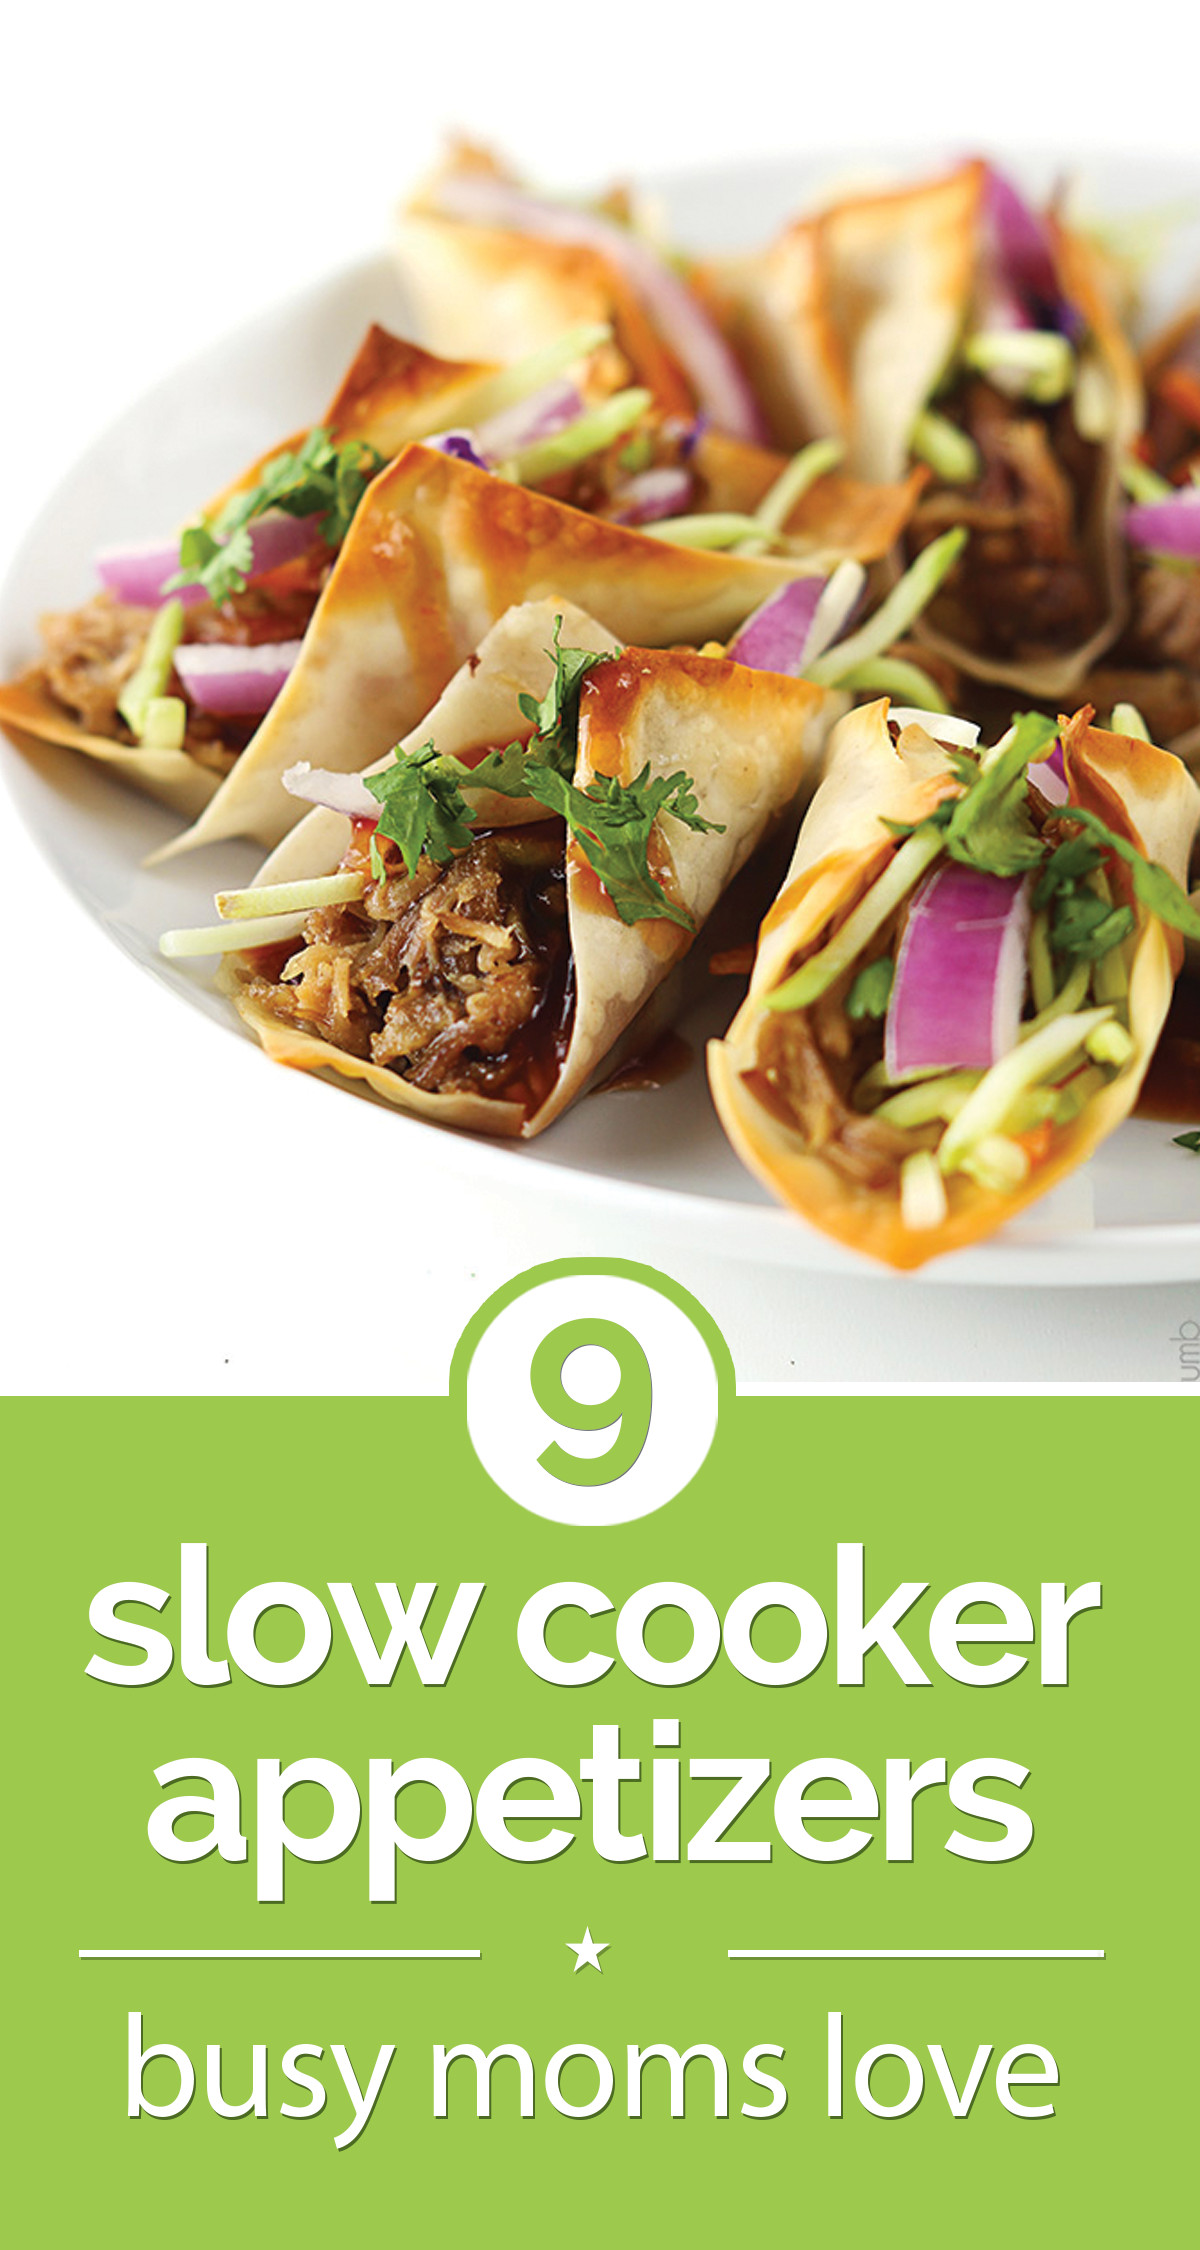 Slow Cooker Appetizer Recipes
 9 Slow Cooker Appetizers Busy Moms Love